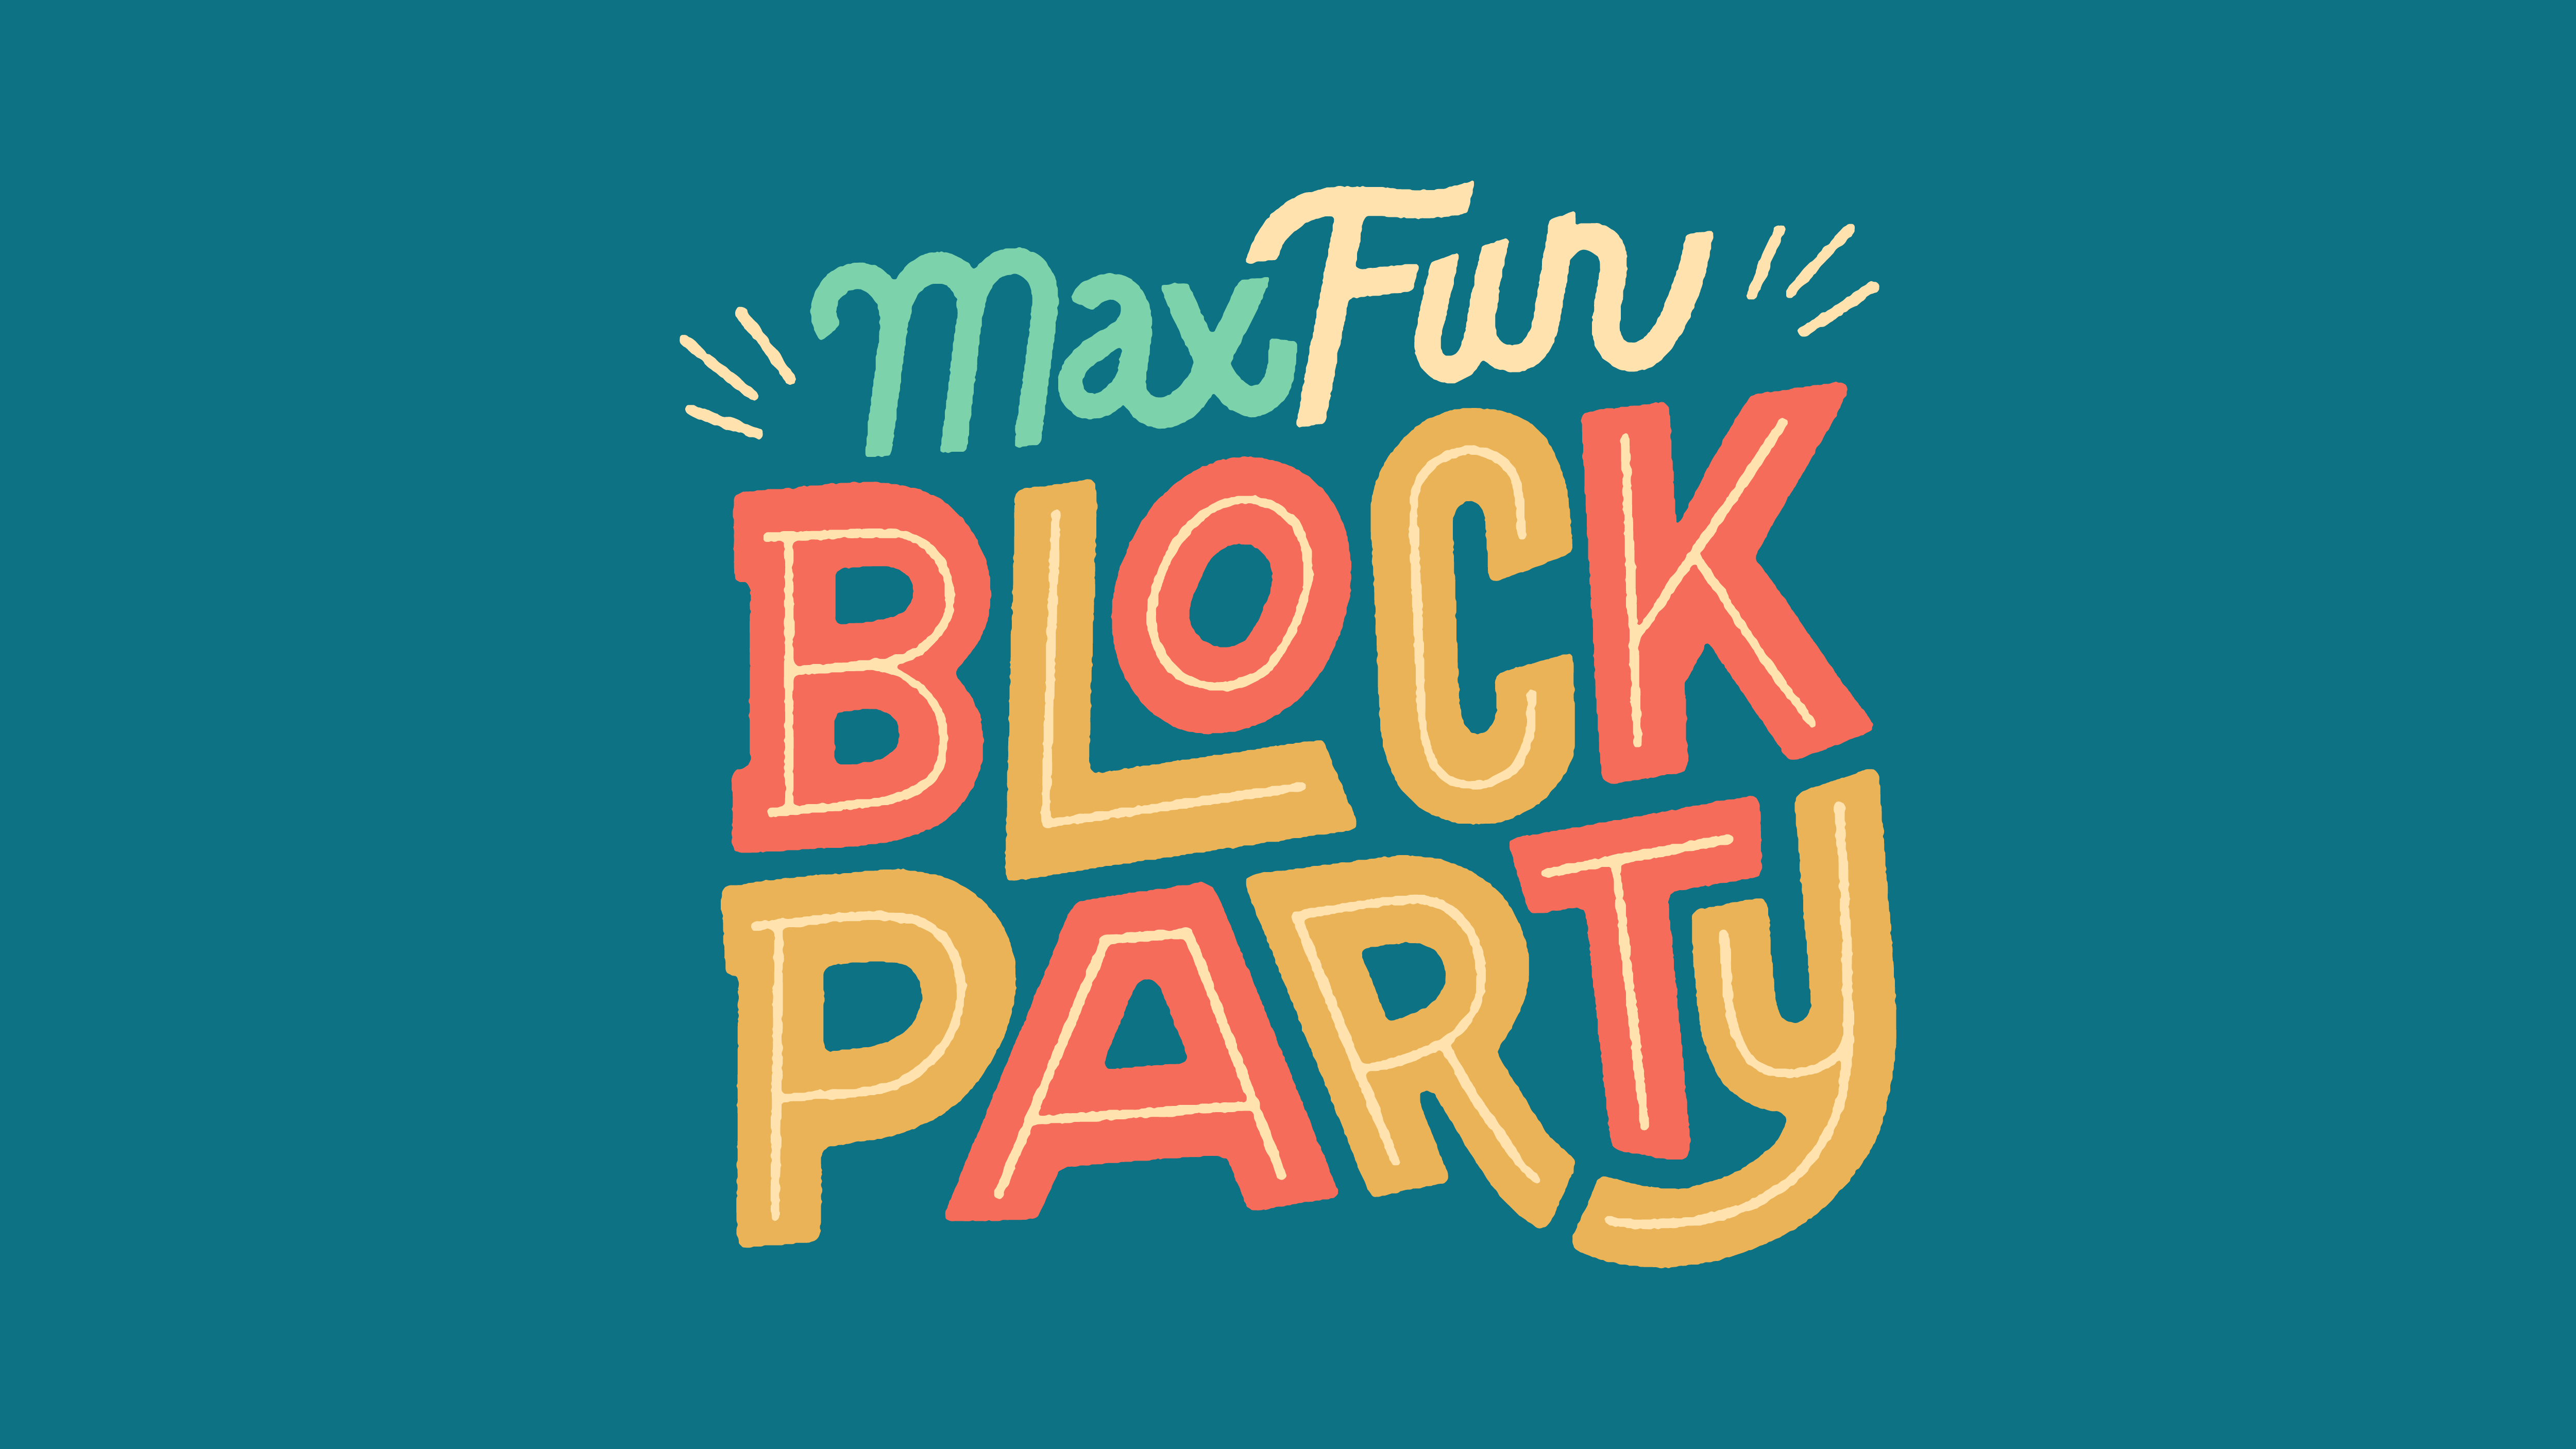 Illustrated words reading “MaxFun Block Party” in alternating orange and yellow letters appear on a solid teal background.